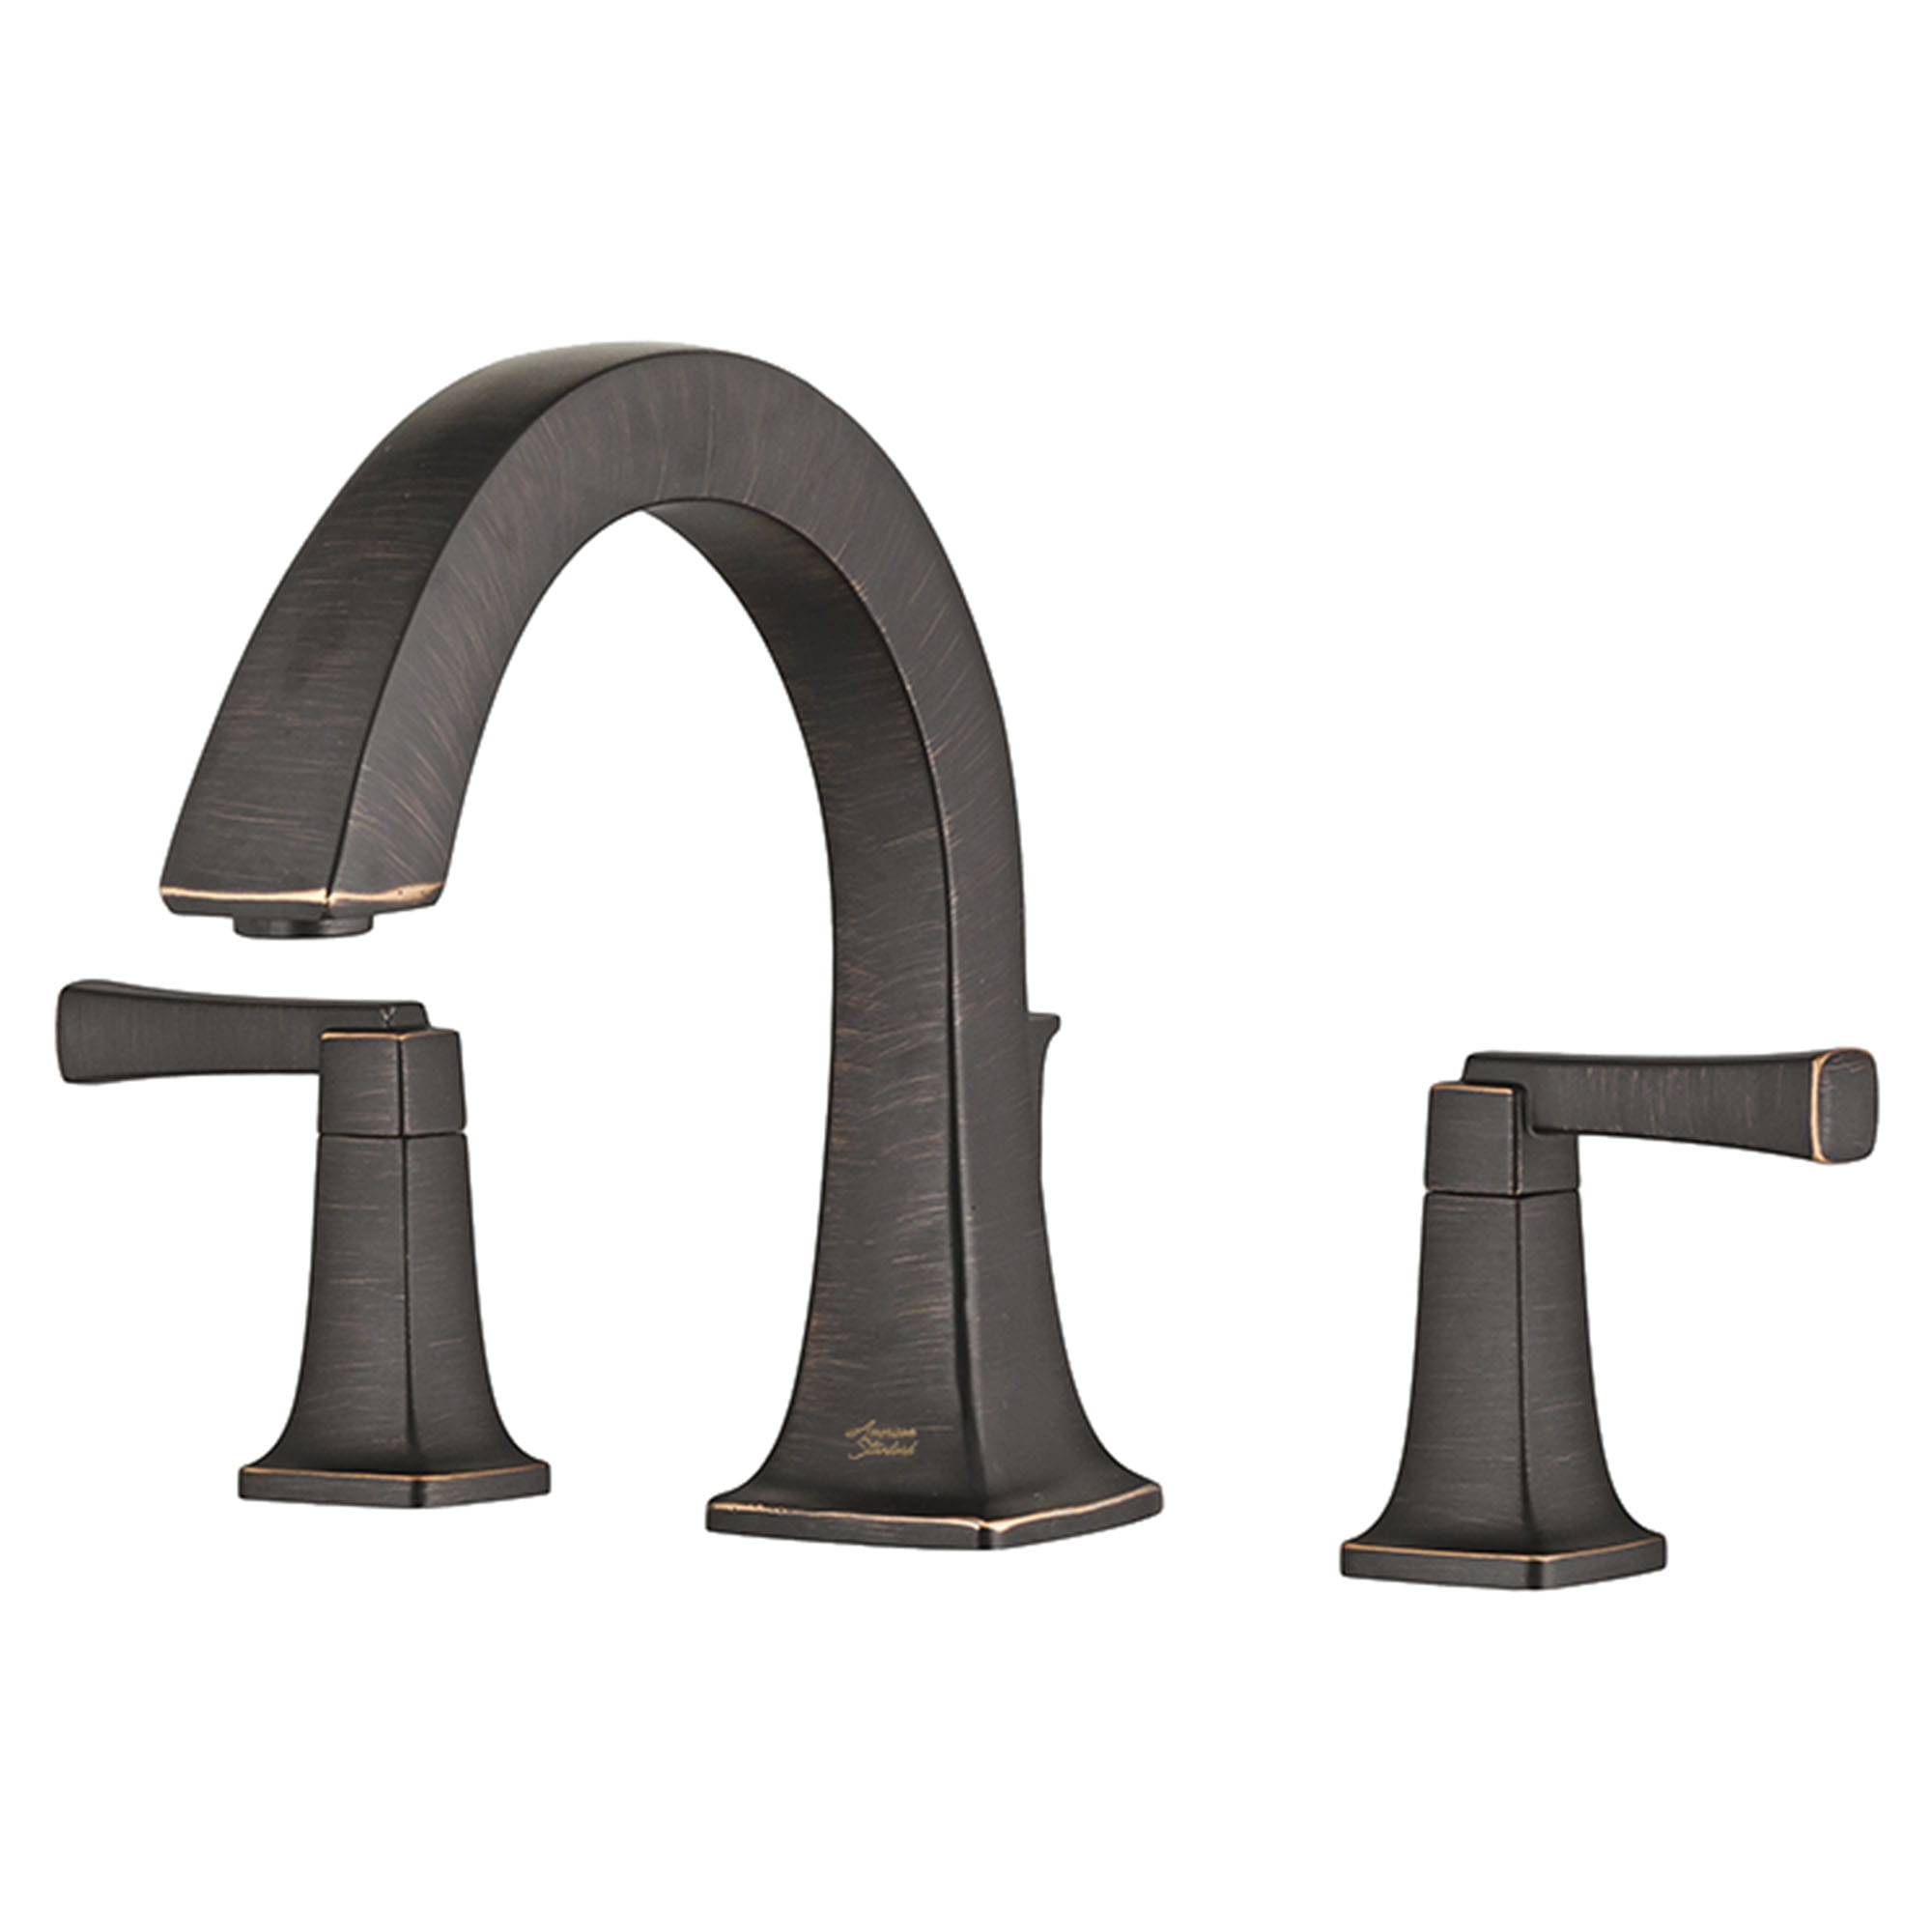 Townsend® Bathtub Faucet With Lever Handles for Flash® Rough-In Valve